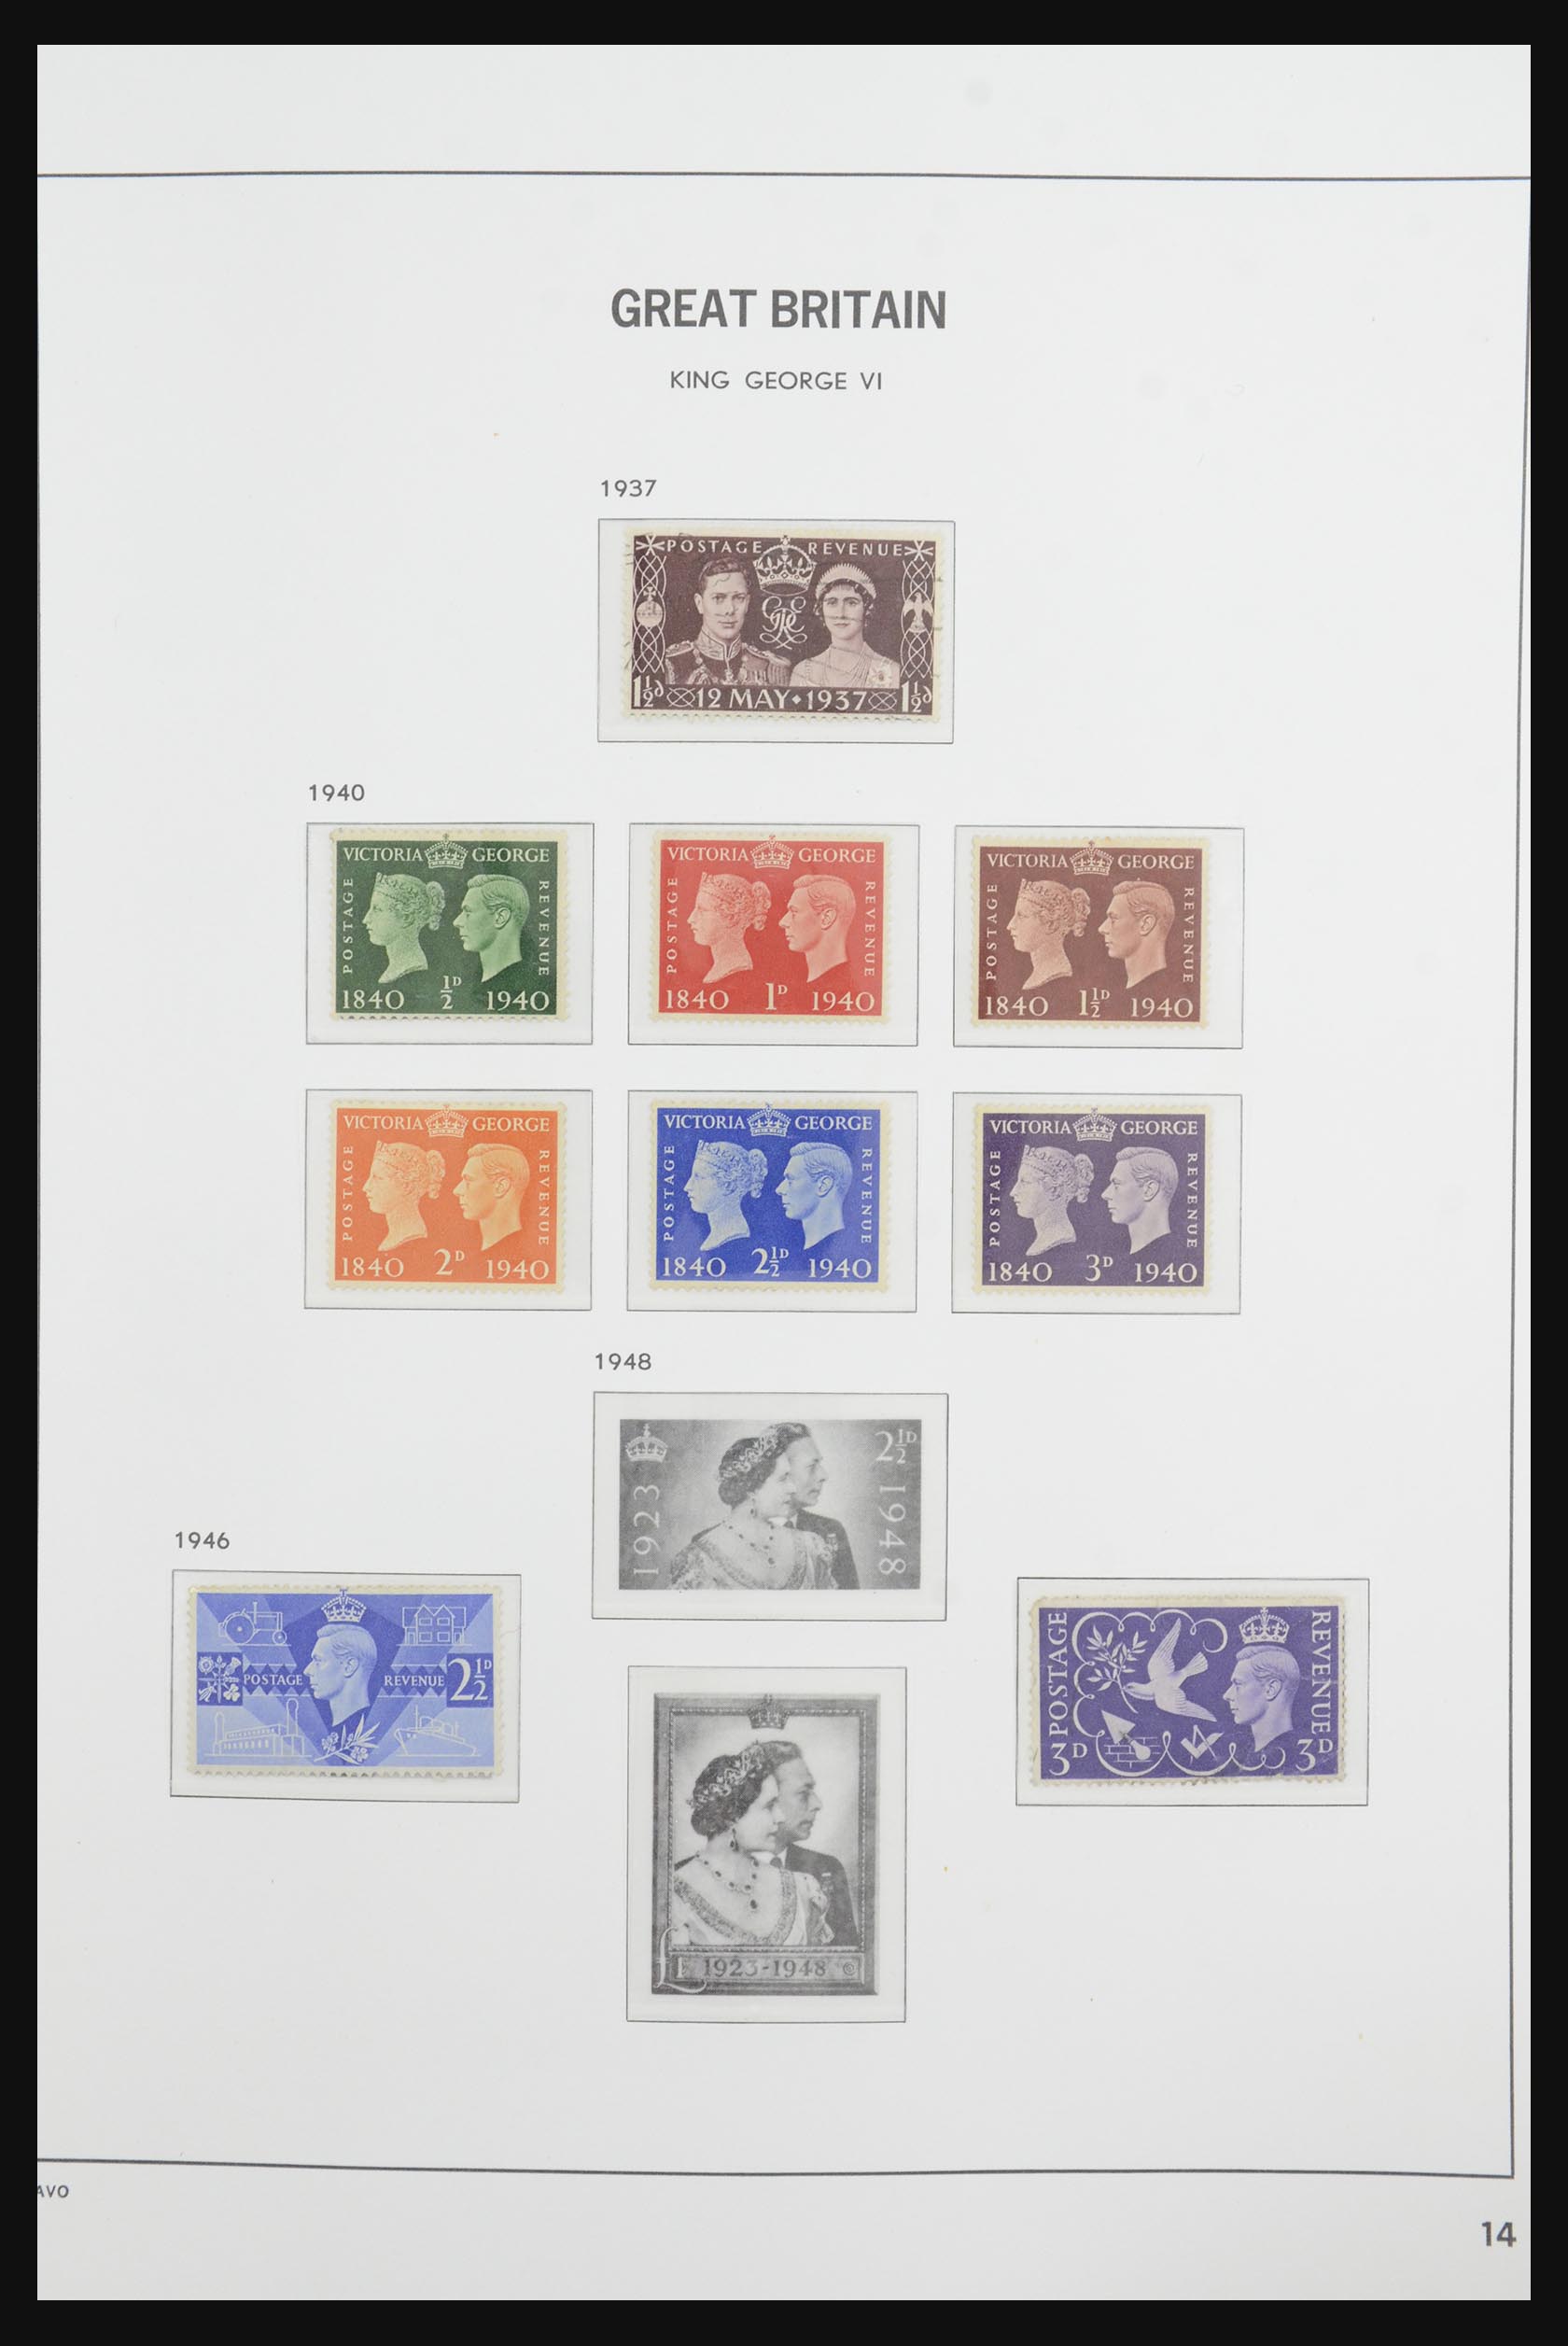 31606 005 - 31606 Great Britain and territories 1840-1950.